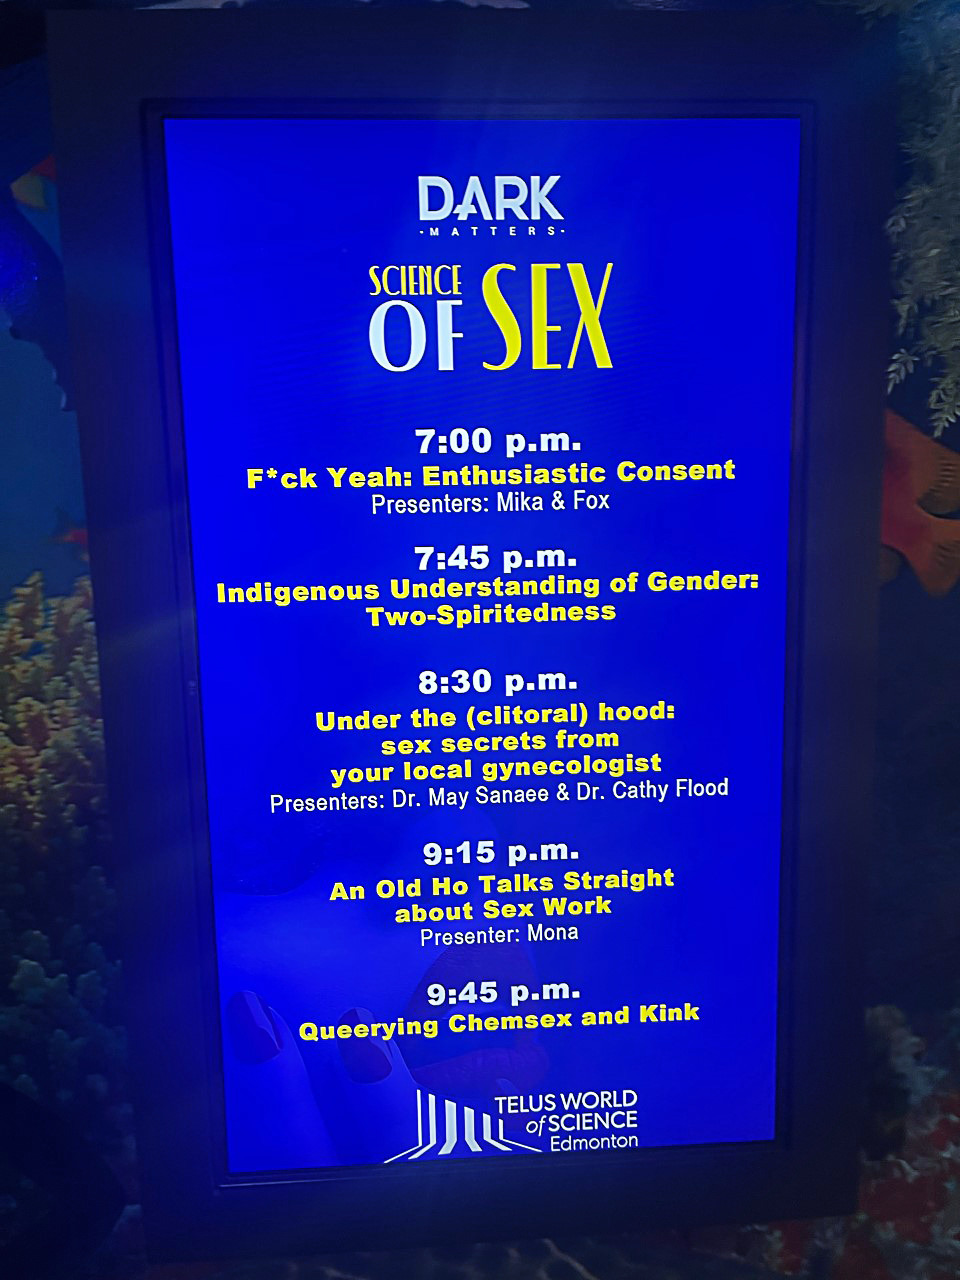 Dark Matters line up of events for the evening at Telus World of Science Edmonton is displayed on a digital screen.